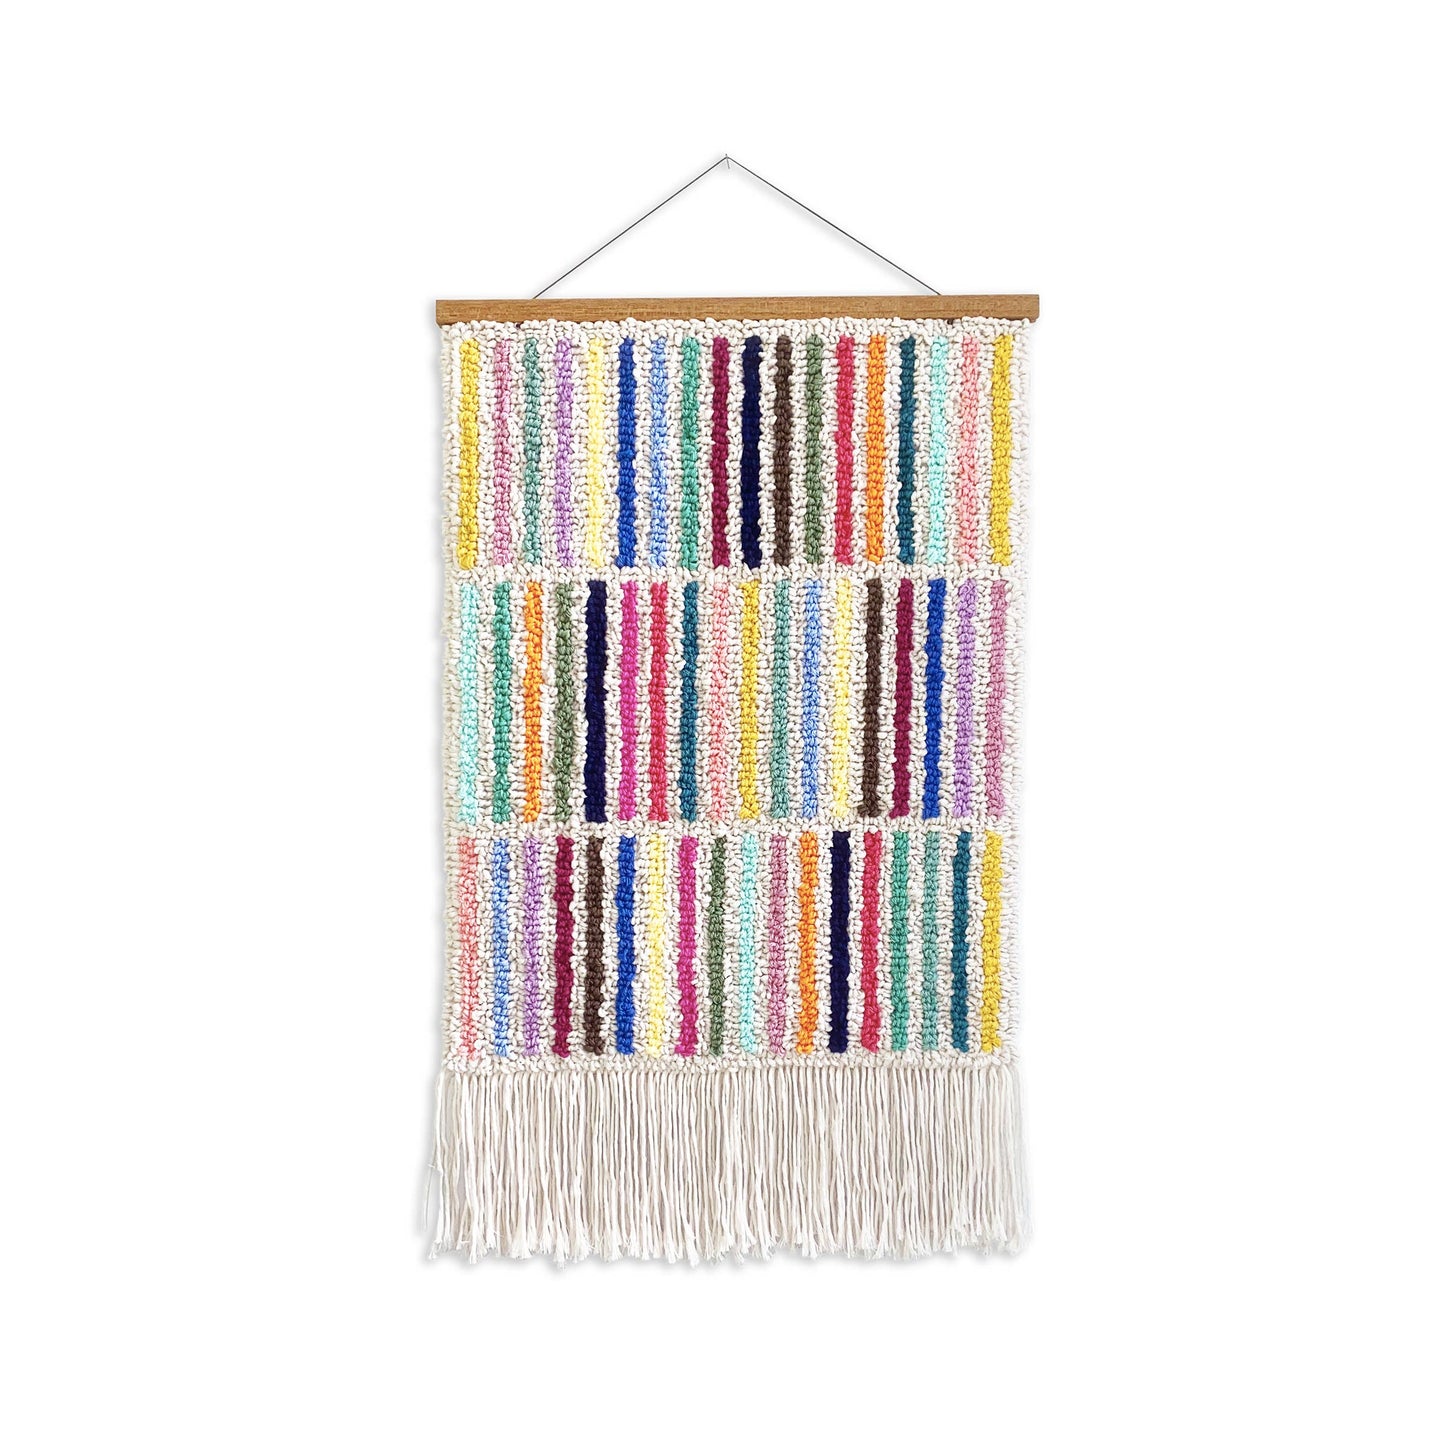 Verve Wall Hanging